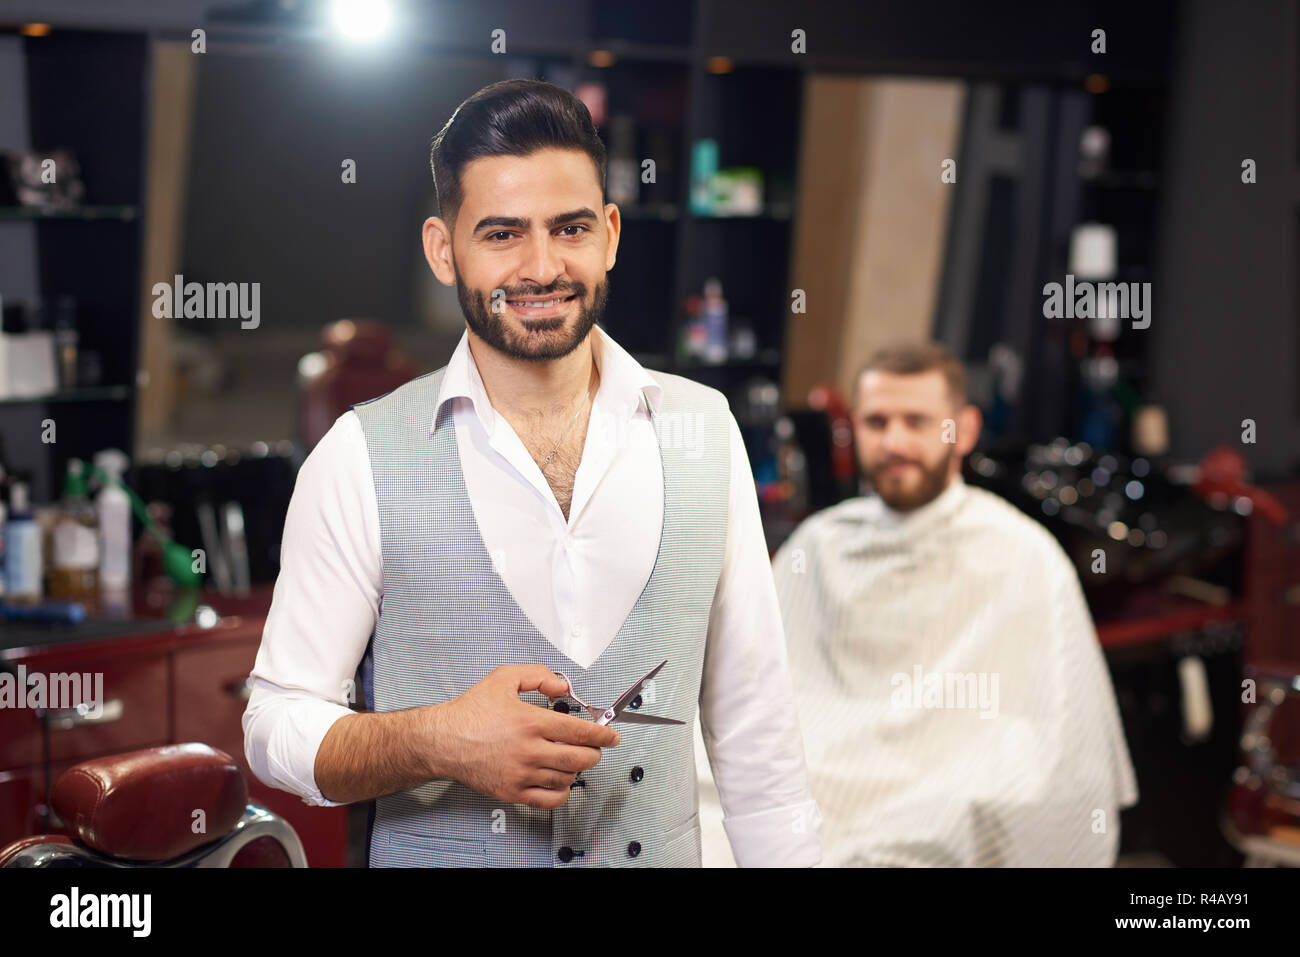 Portrait of professional barber looking at camera, smiling and posing. Stylish man keeping scissors during doing haircut in barber shop. Smiling male customer sitting in chair at background. Stock Photo